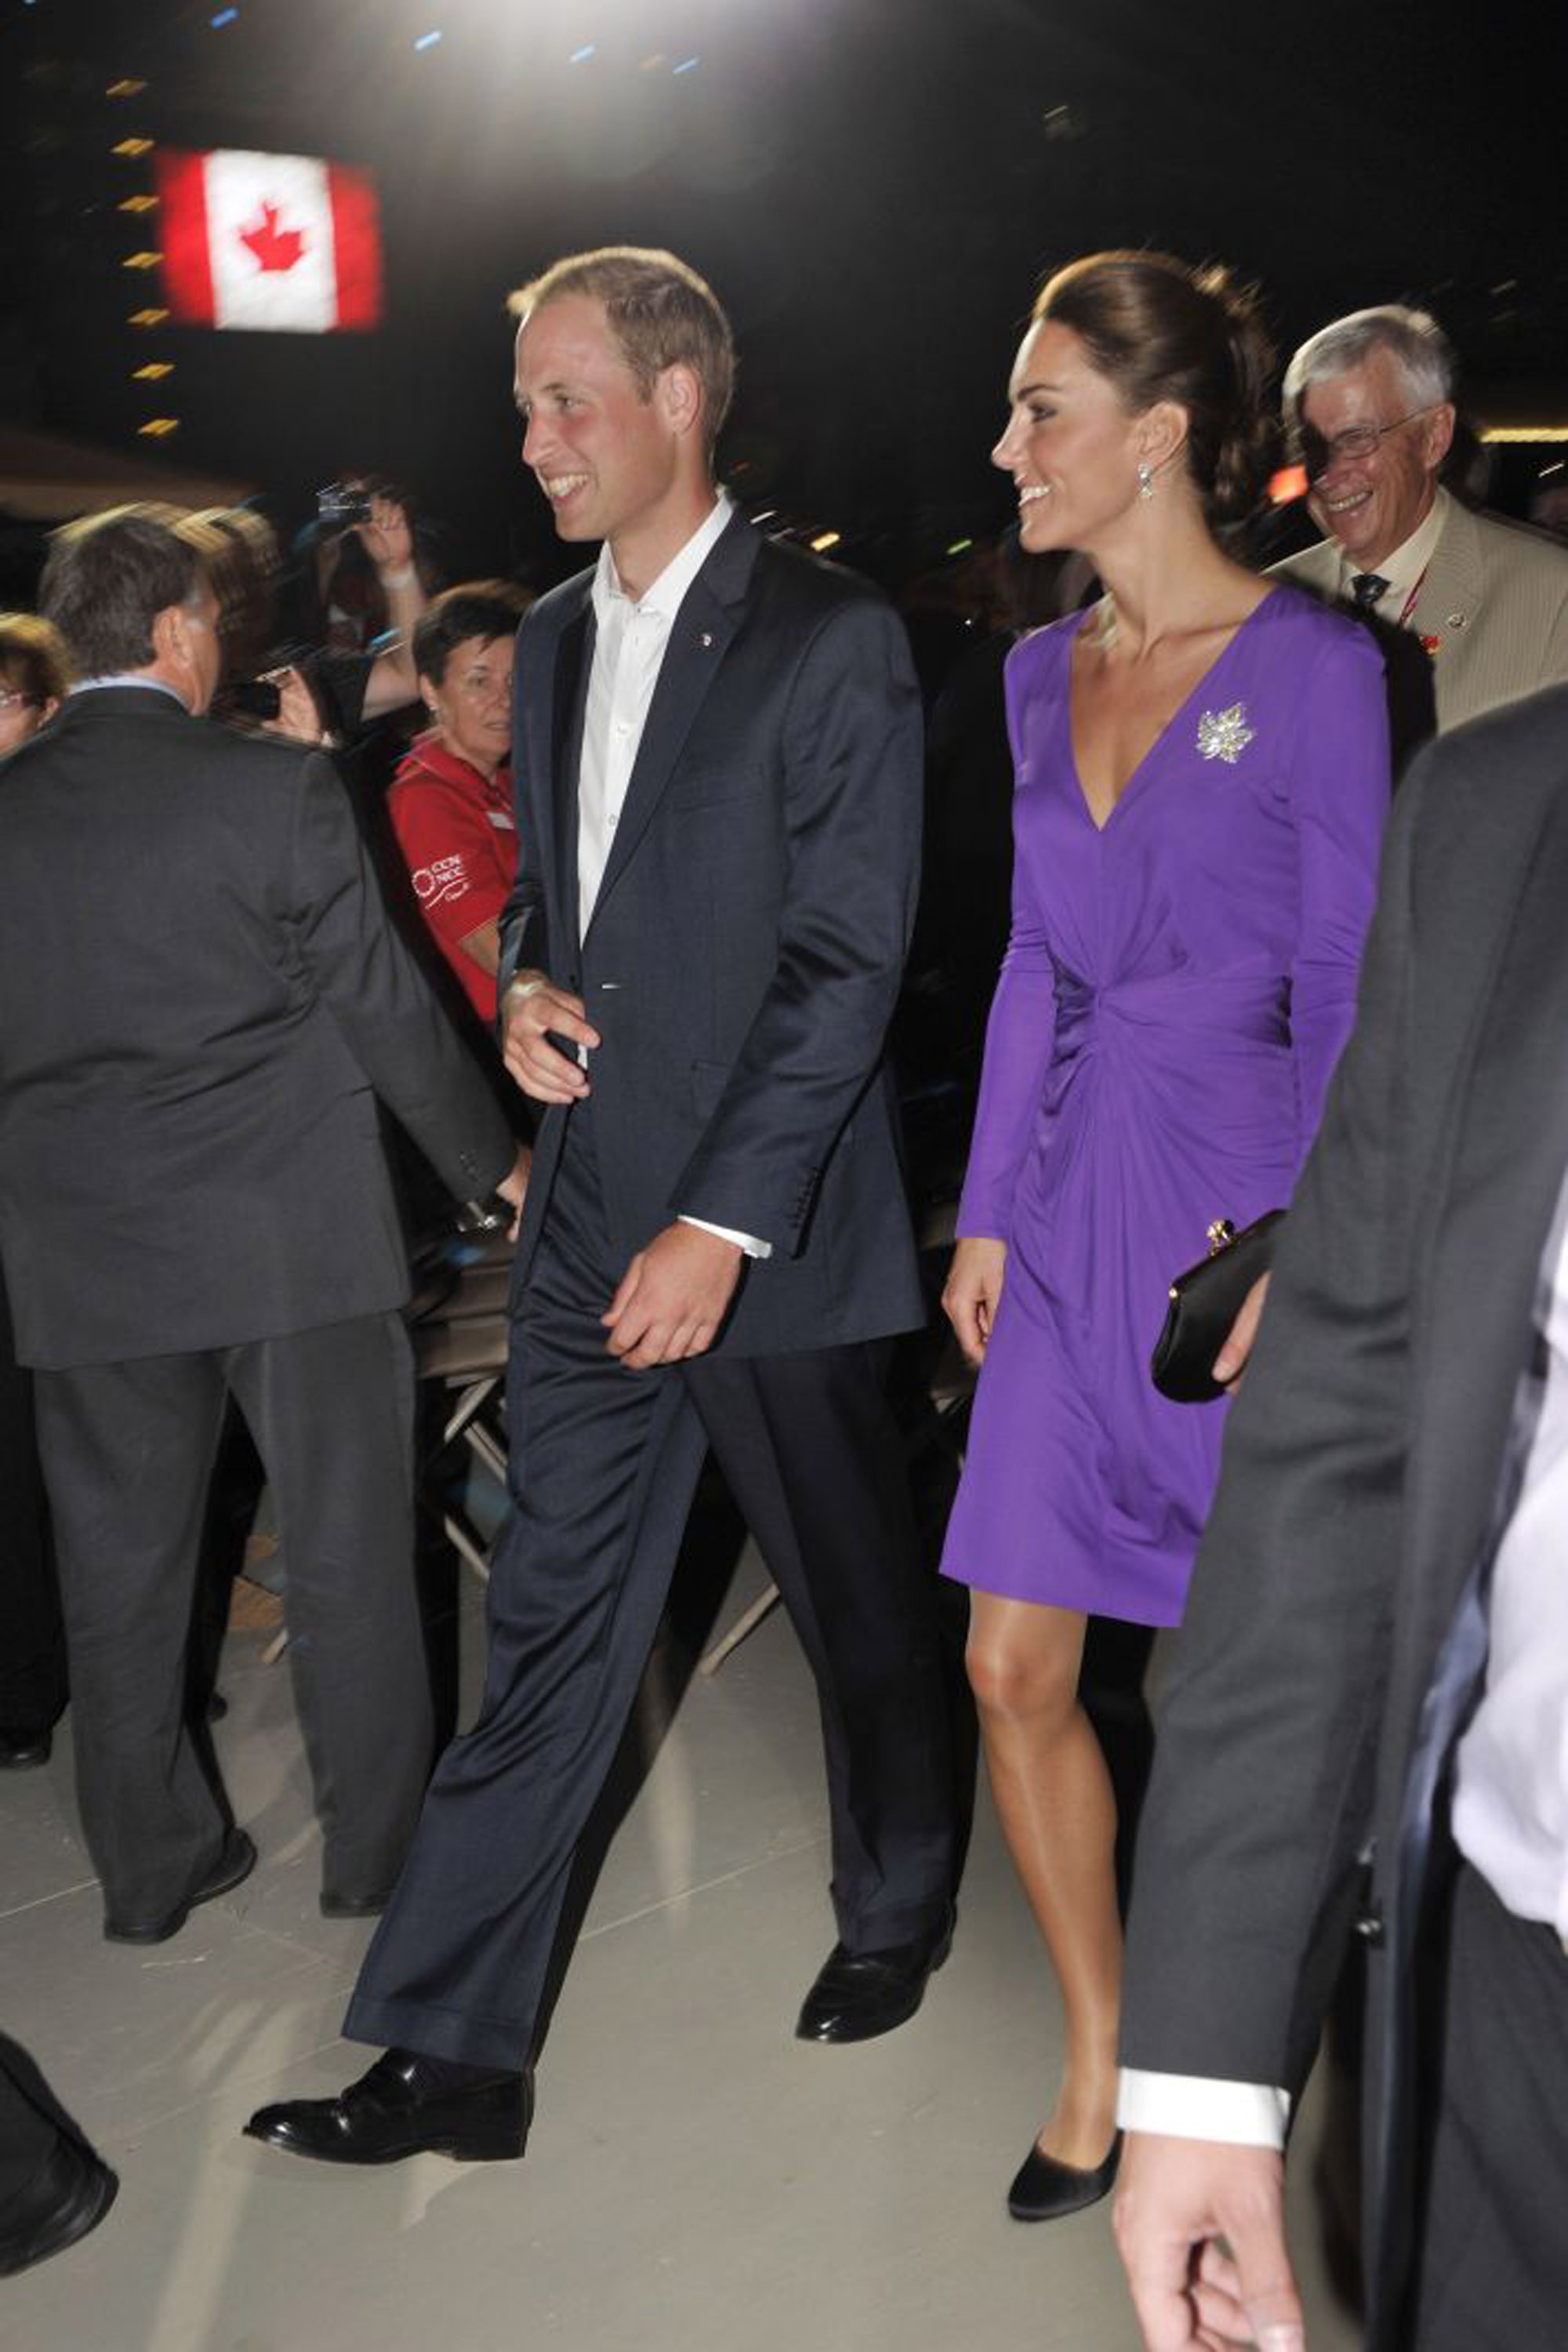 Prince William And Kate Middleton Celebrated Canada With The Prince William And Kate Middleton